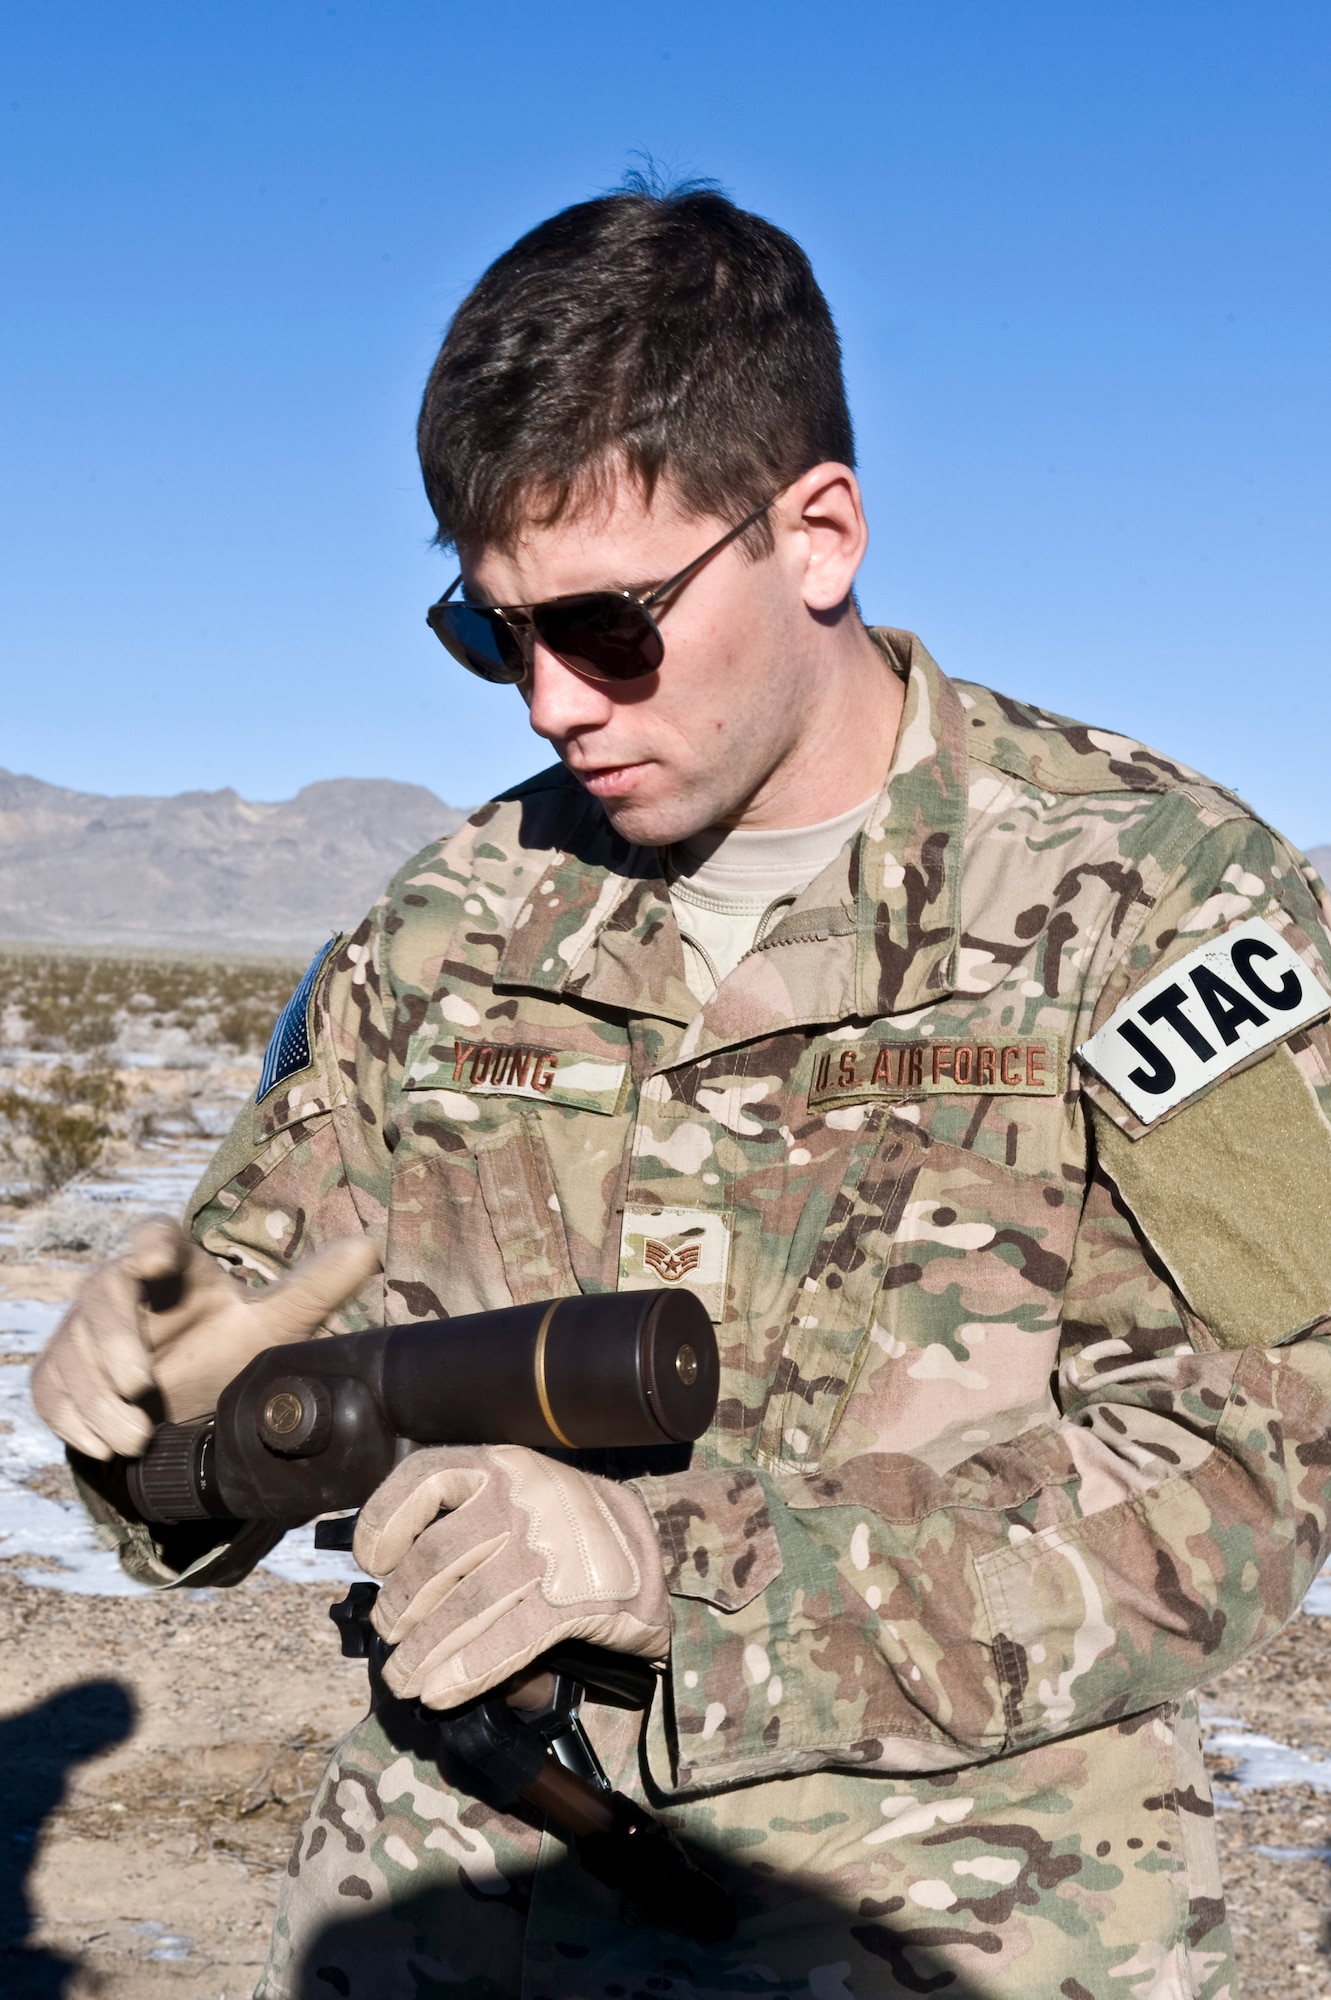 U.S. Air Force Staff Sgt. Christopher Young, 605th Test and Evaluation Squadron joint terminal attack controller, sets up equipment during a Handheld Laser Marker Tactics Development and Evaluation project Dec. 11, 2013, at the Nevada Test and Training Range. The objective of the test is to provided data for decision makers to decide whether or not to allow the LA-10u/PEQ handheld laser marker to be used as a laser designator. As a laser designator it will be able to guide munitions to its intended target. (U.S. Air Force photo by Senior Airman Matthew Lancaster)